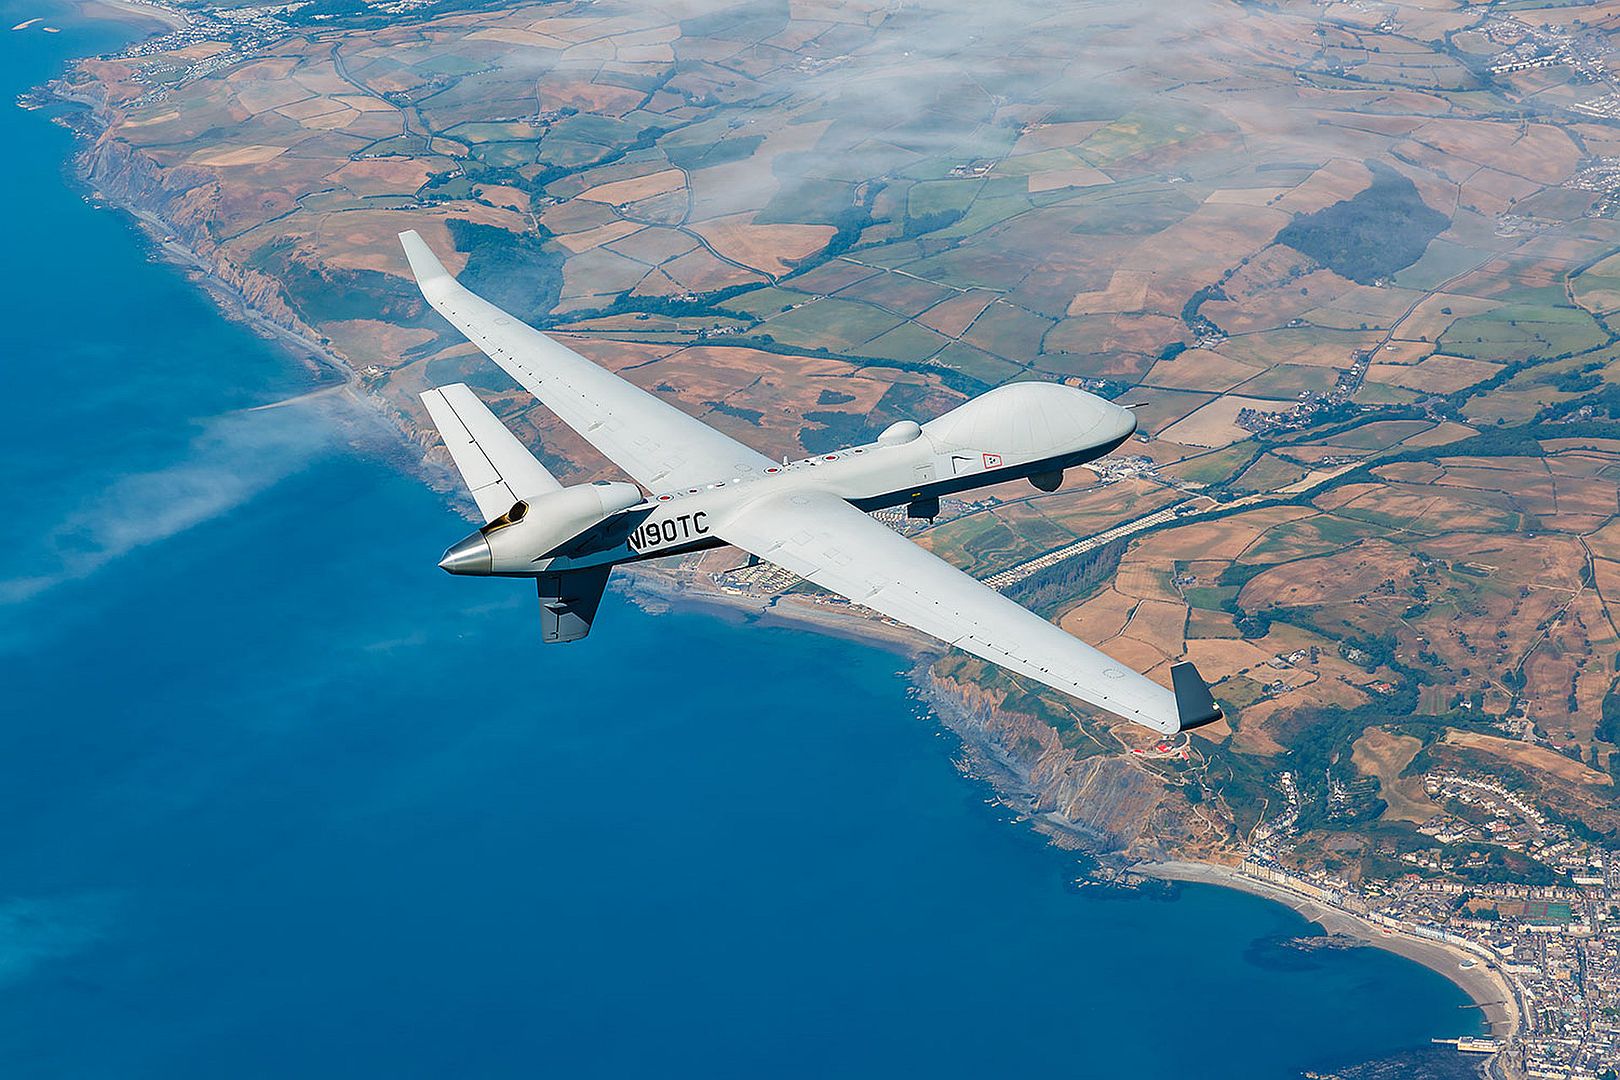 9B Remotely Piloted Aircraft System